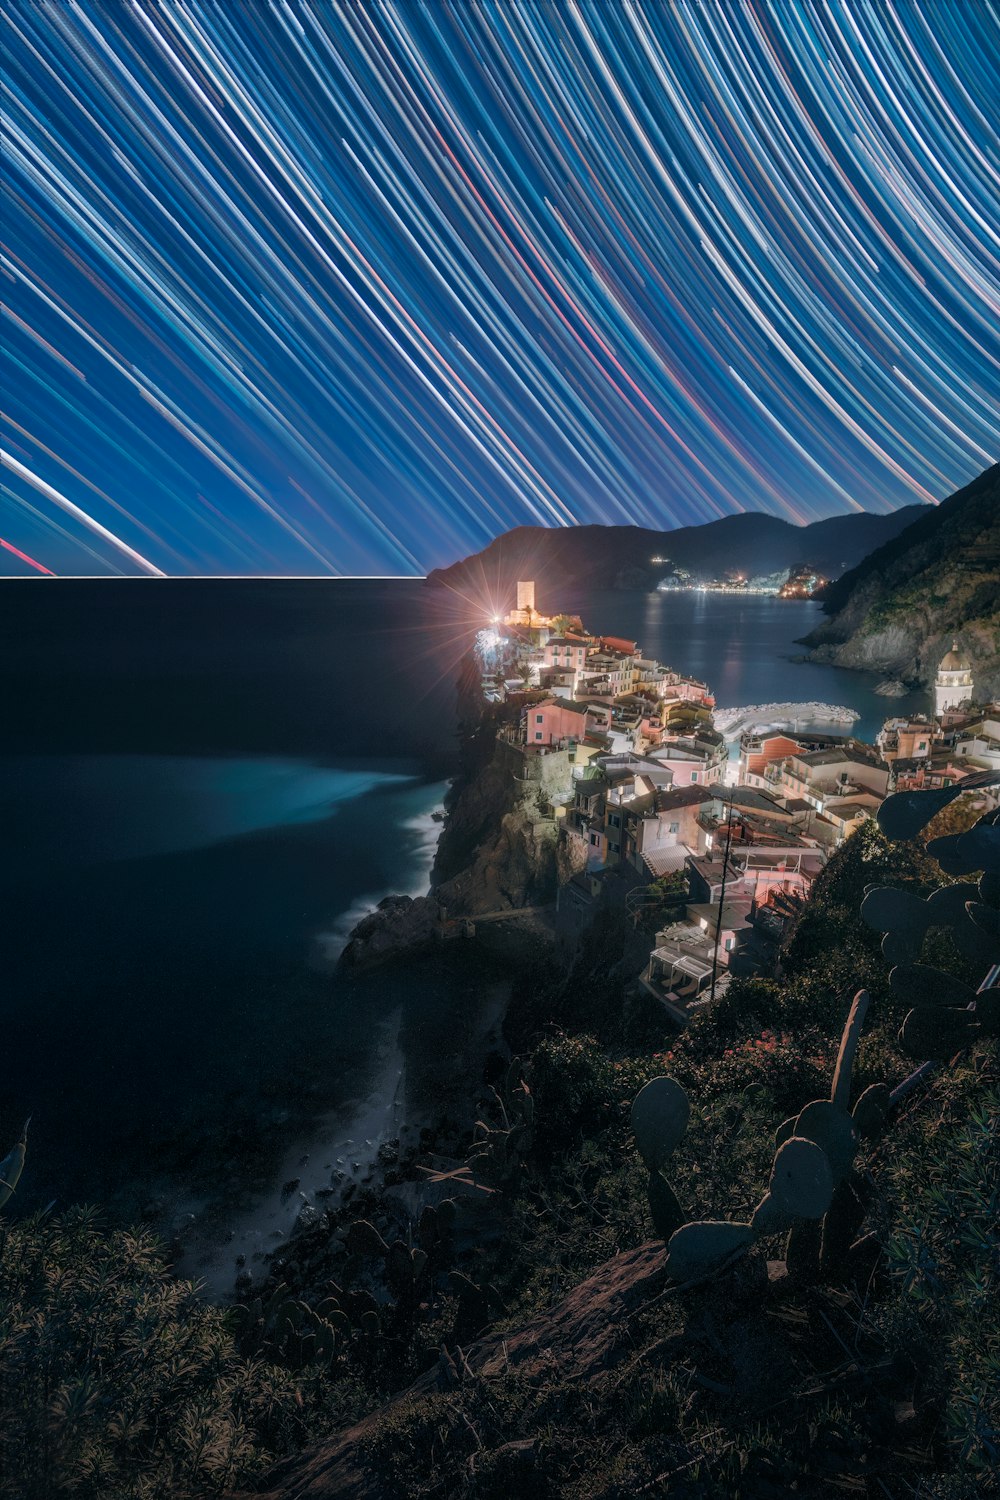 a long exposure of the night sky over a town